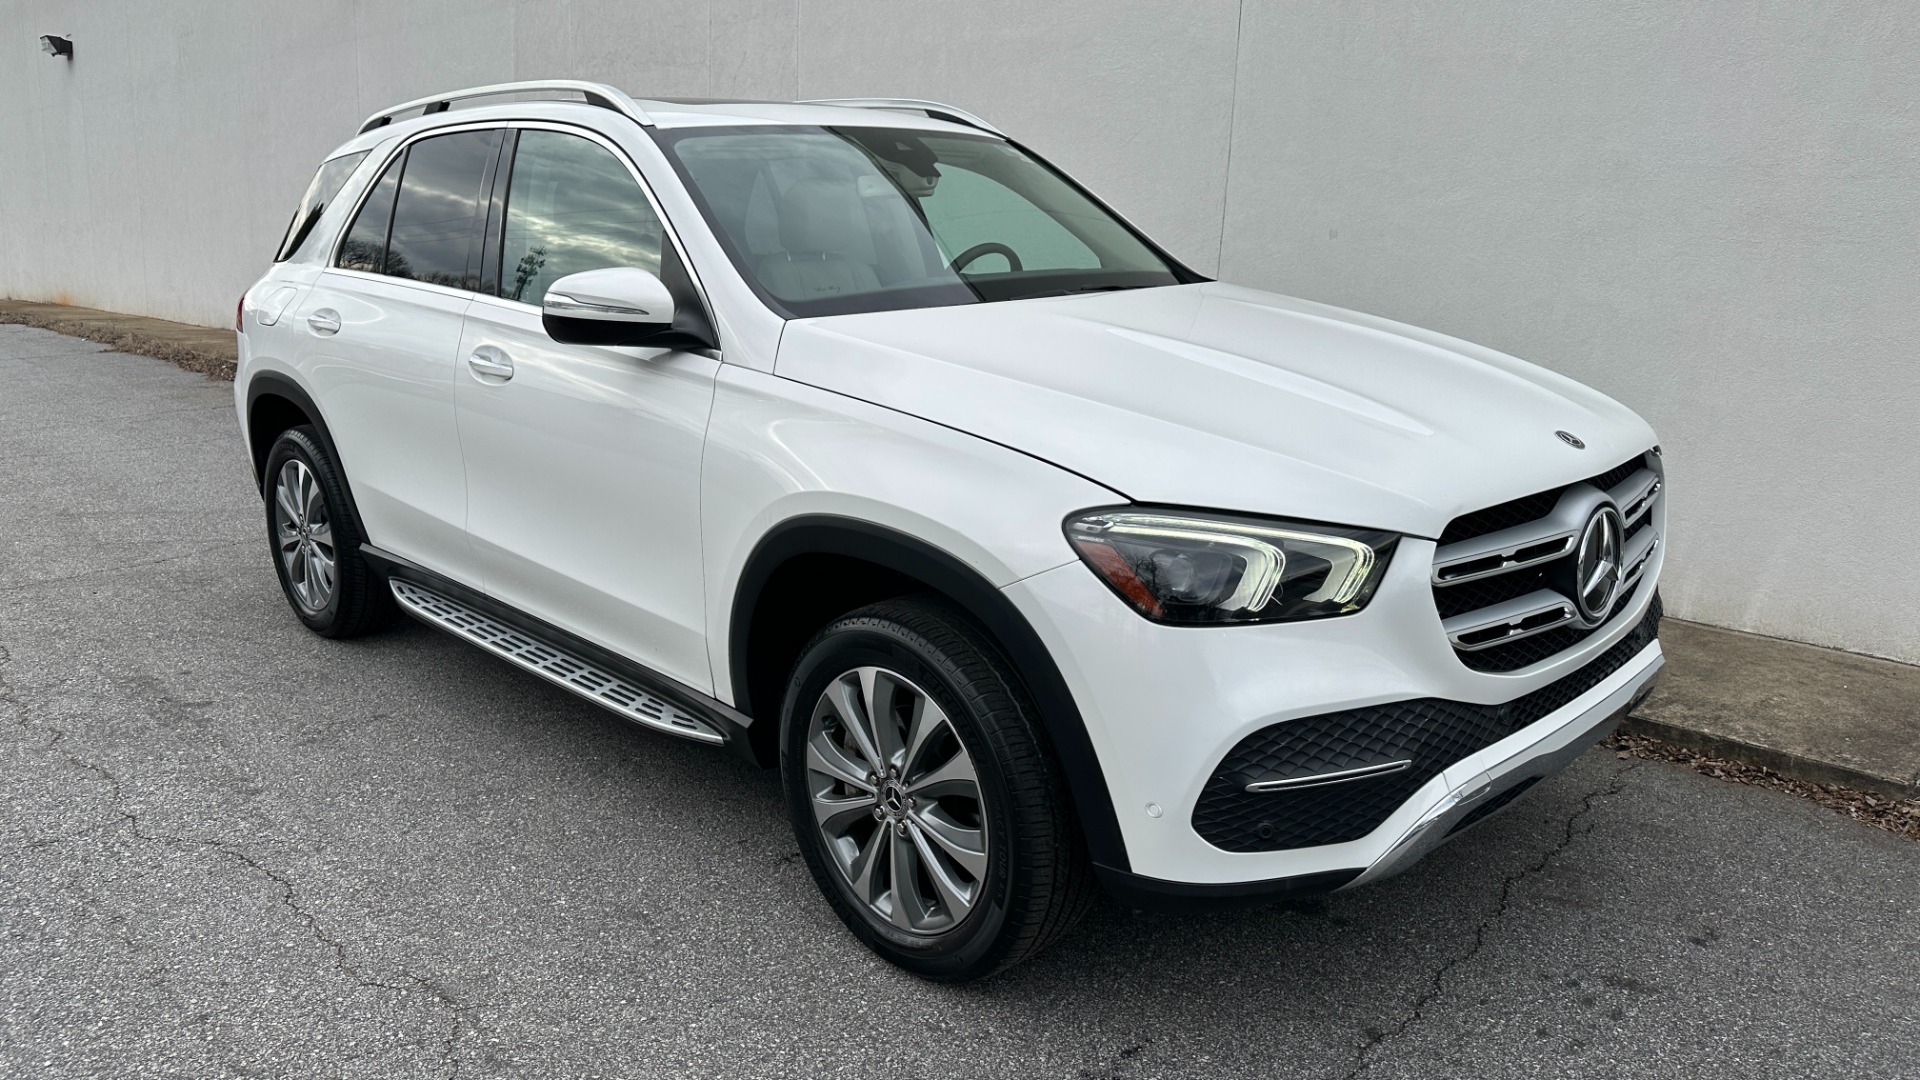 Used 2020 Mercedes-Benz GLE GLE350 / 3RD ROW SEATING / BURMESTER SOUND / PREMIUM PACKAGE / 19 IN WHEELS for sale $46,295 at Formula Imports in Charlotte NC 28227 5